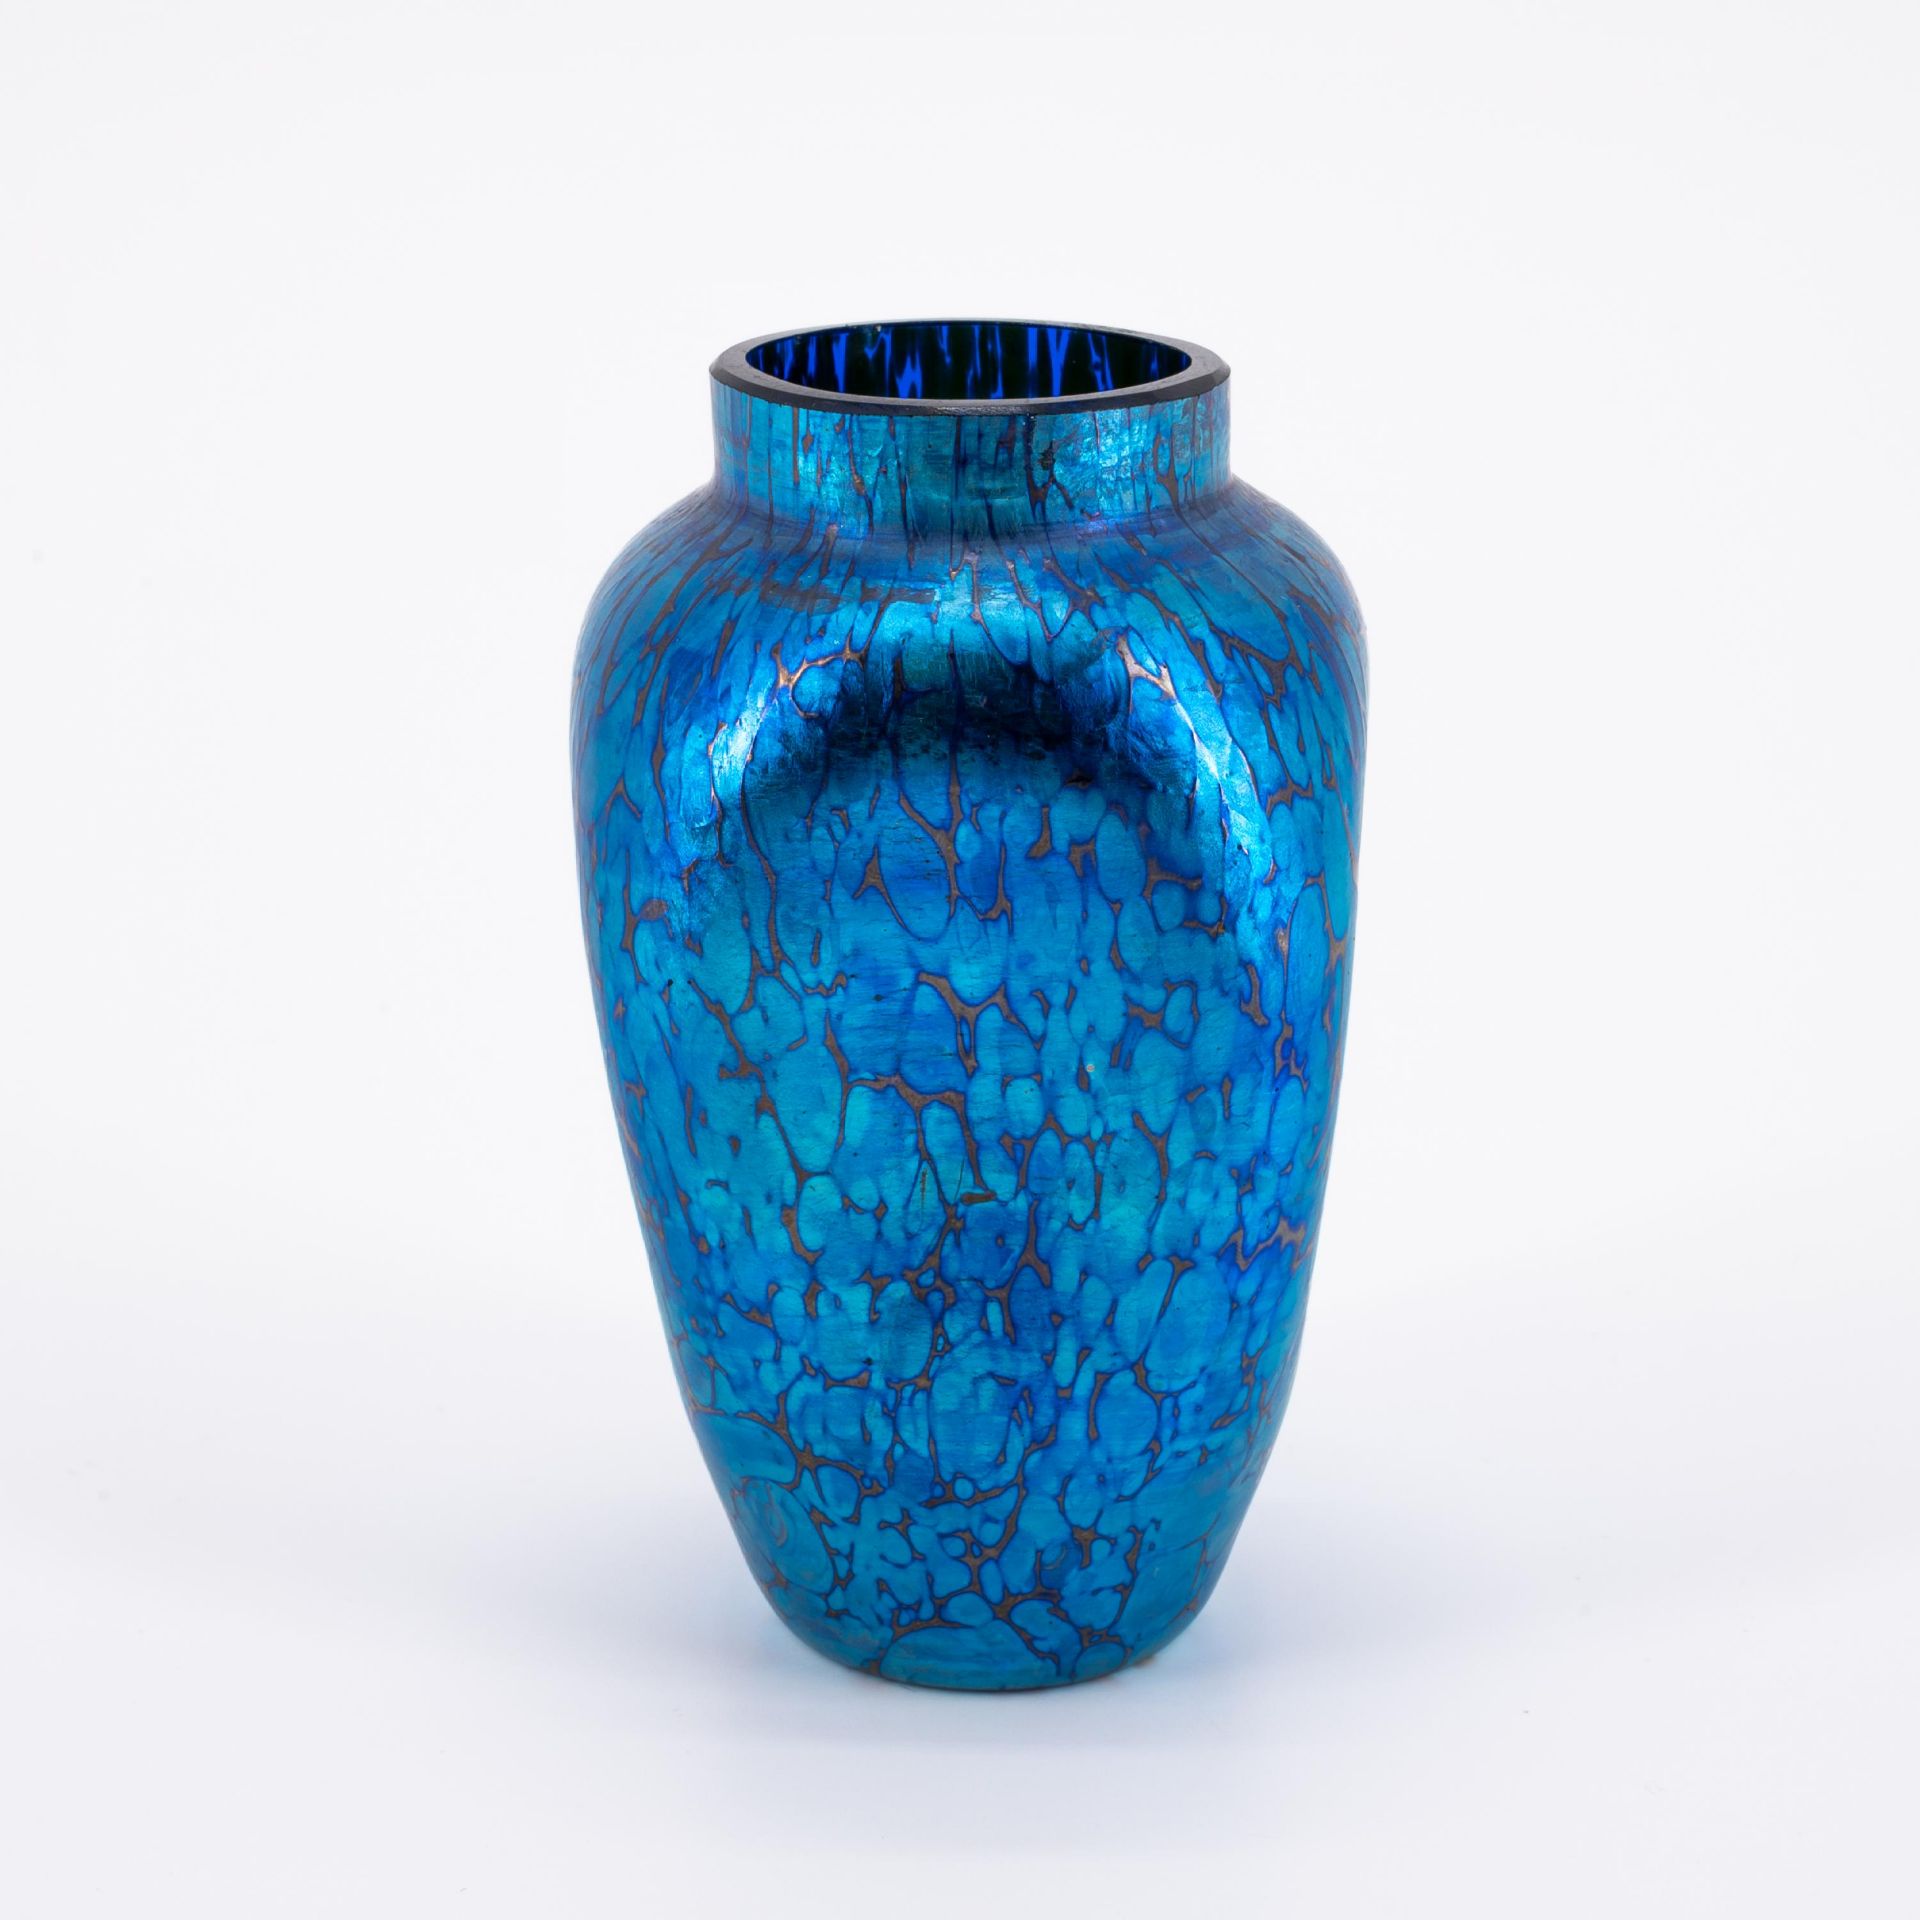 SMALL ELECTRIC-BLUE FAVRILE-GLASS VASE - Image 4 of 6